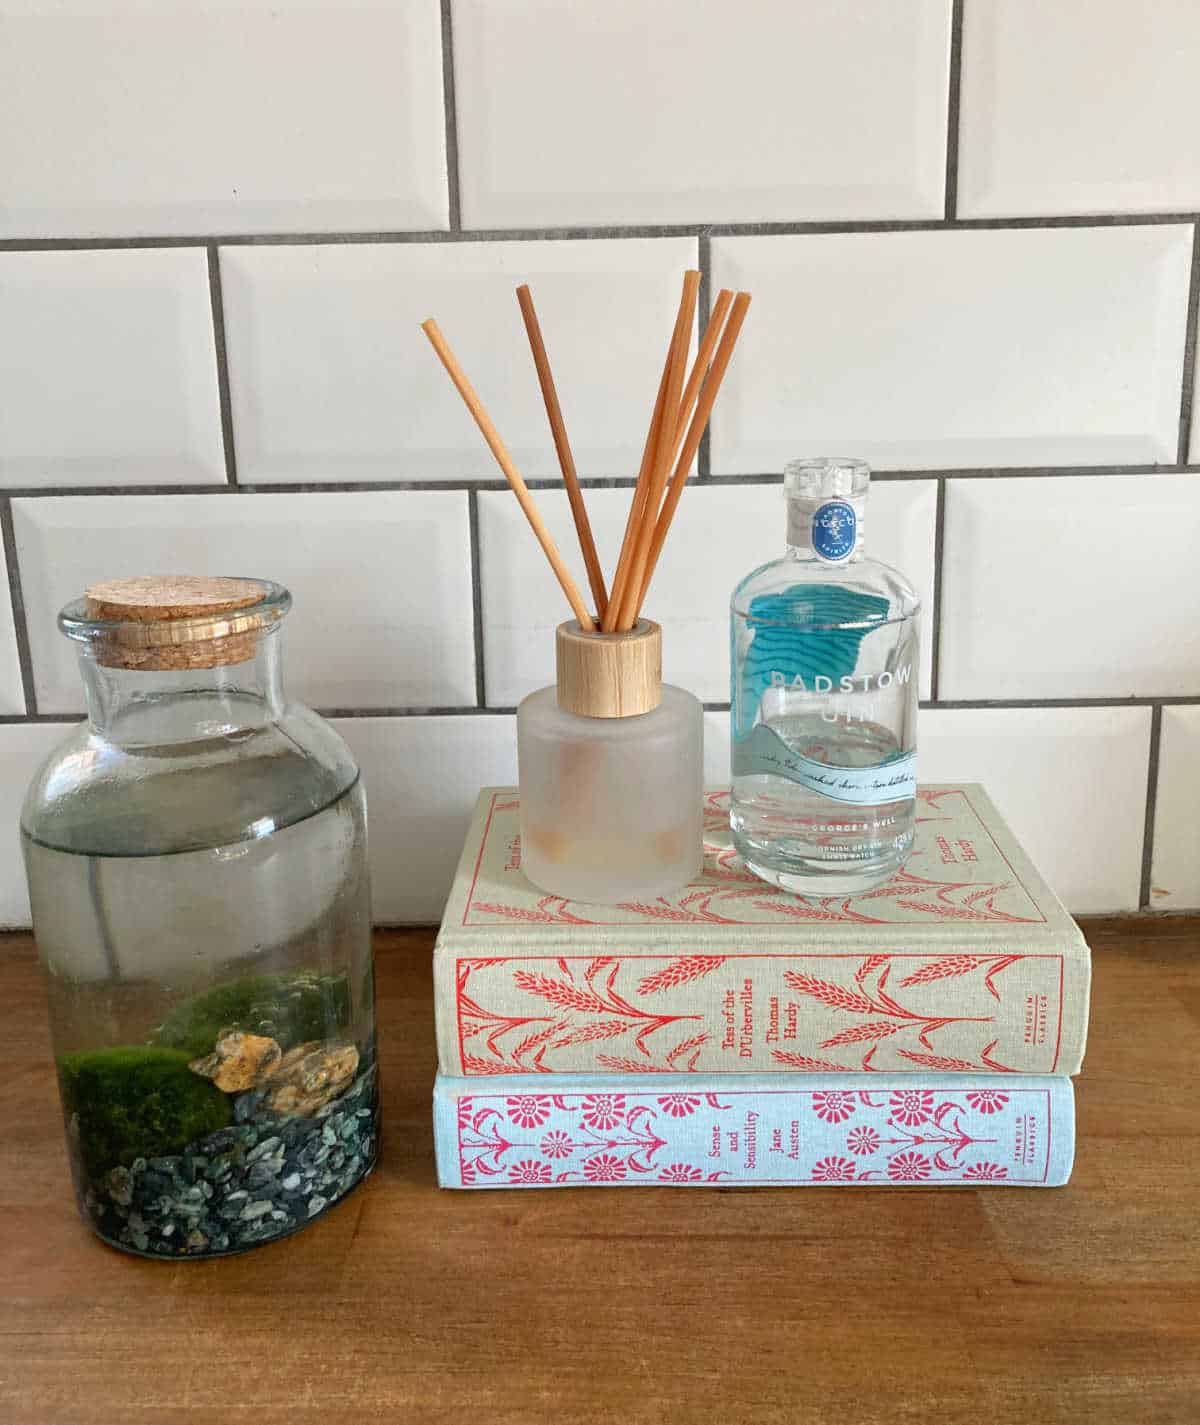 Reed diffuser sitting on books, next to a mini bottle of Padstow gin and a glass bottle of moss balls.